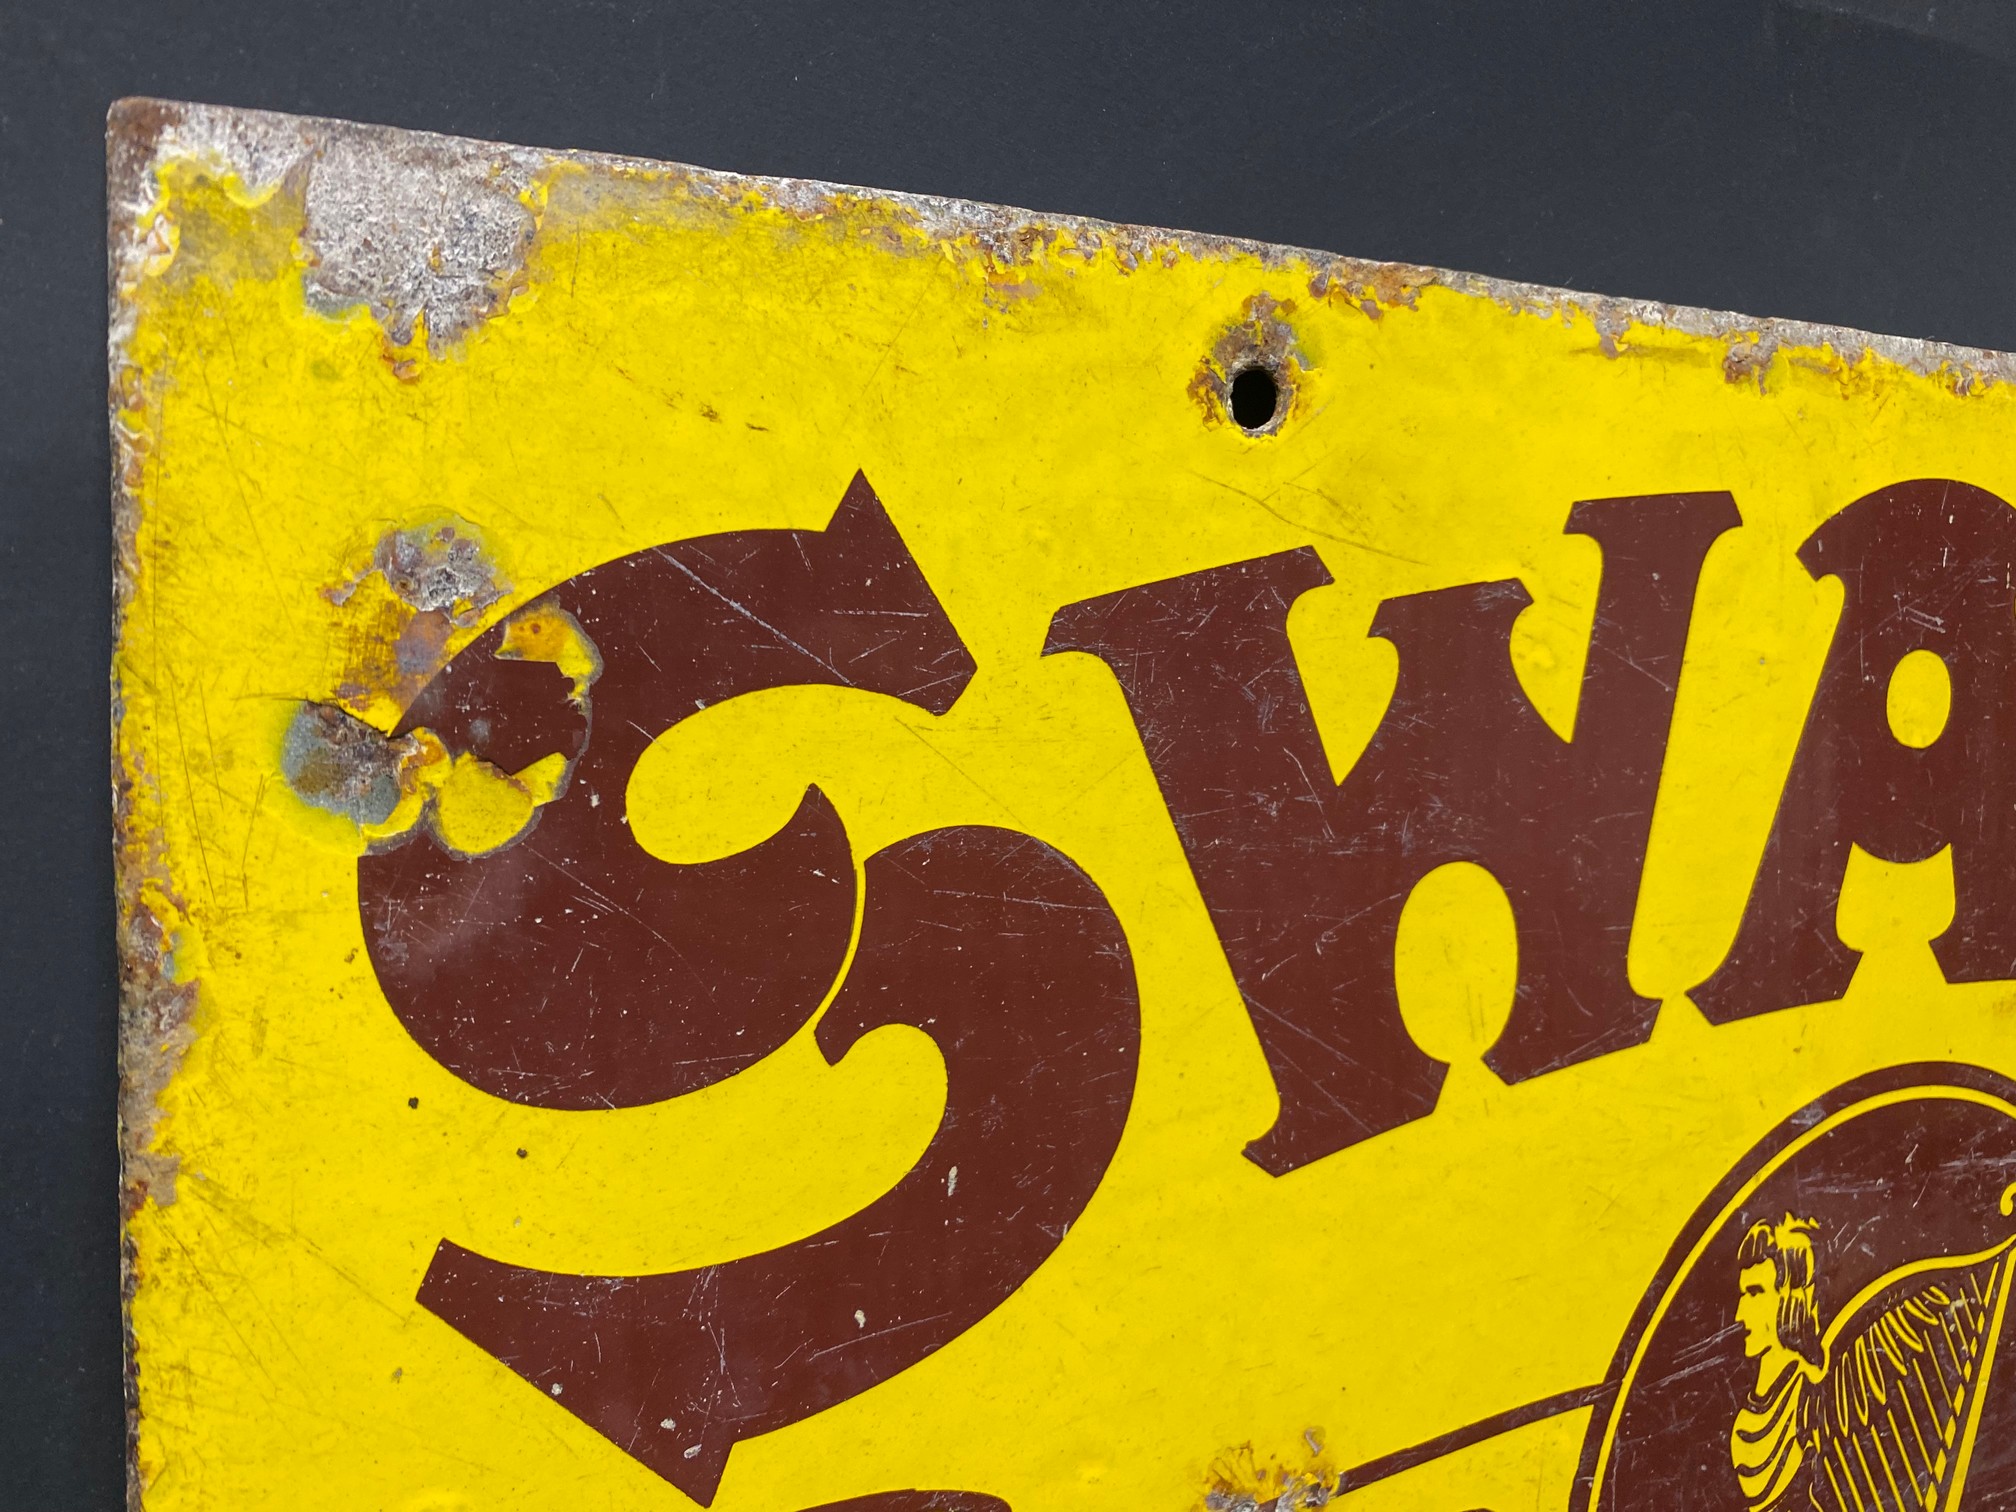 A SWARC Harp Brand Motor Oils and Greases double sided enamel sign, 20 x 16". - Image 4 of 6